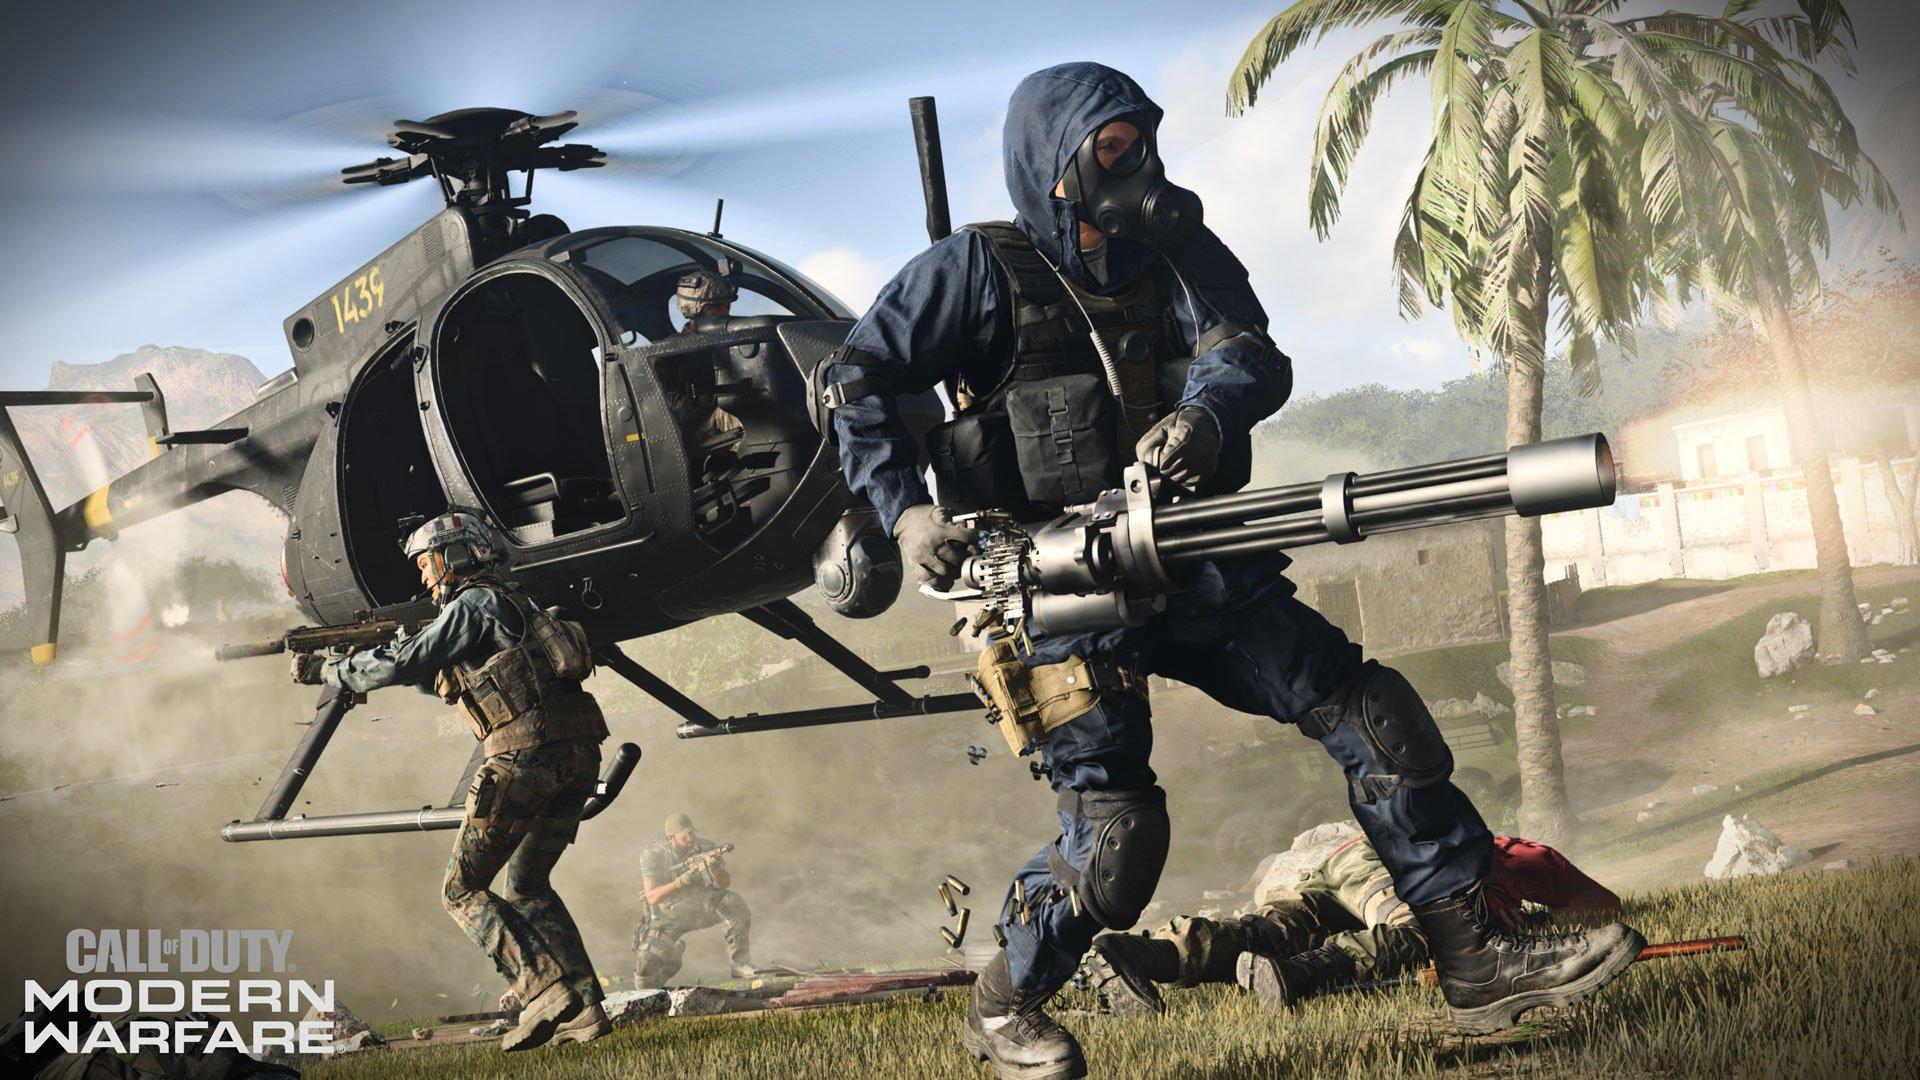 Call of Duty: Modern Warfare Patches Are Getting Completely Out